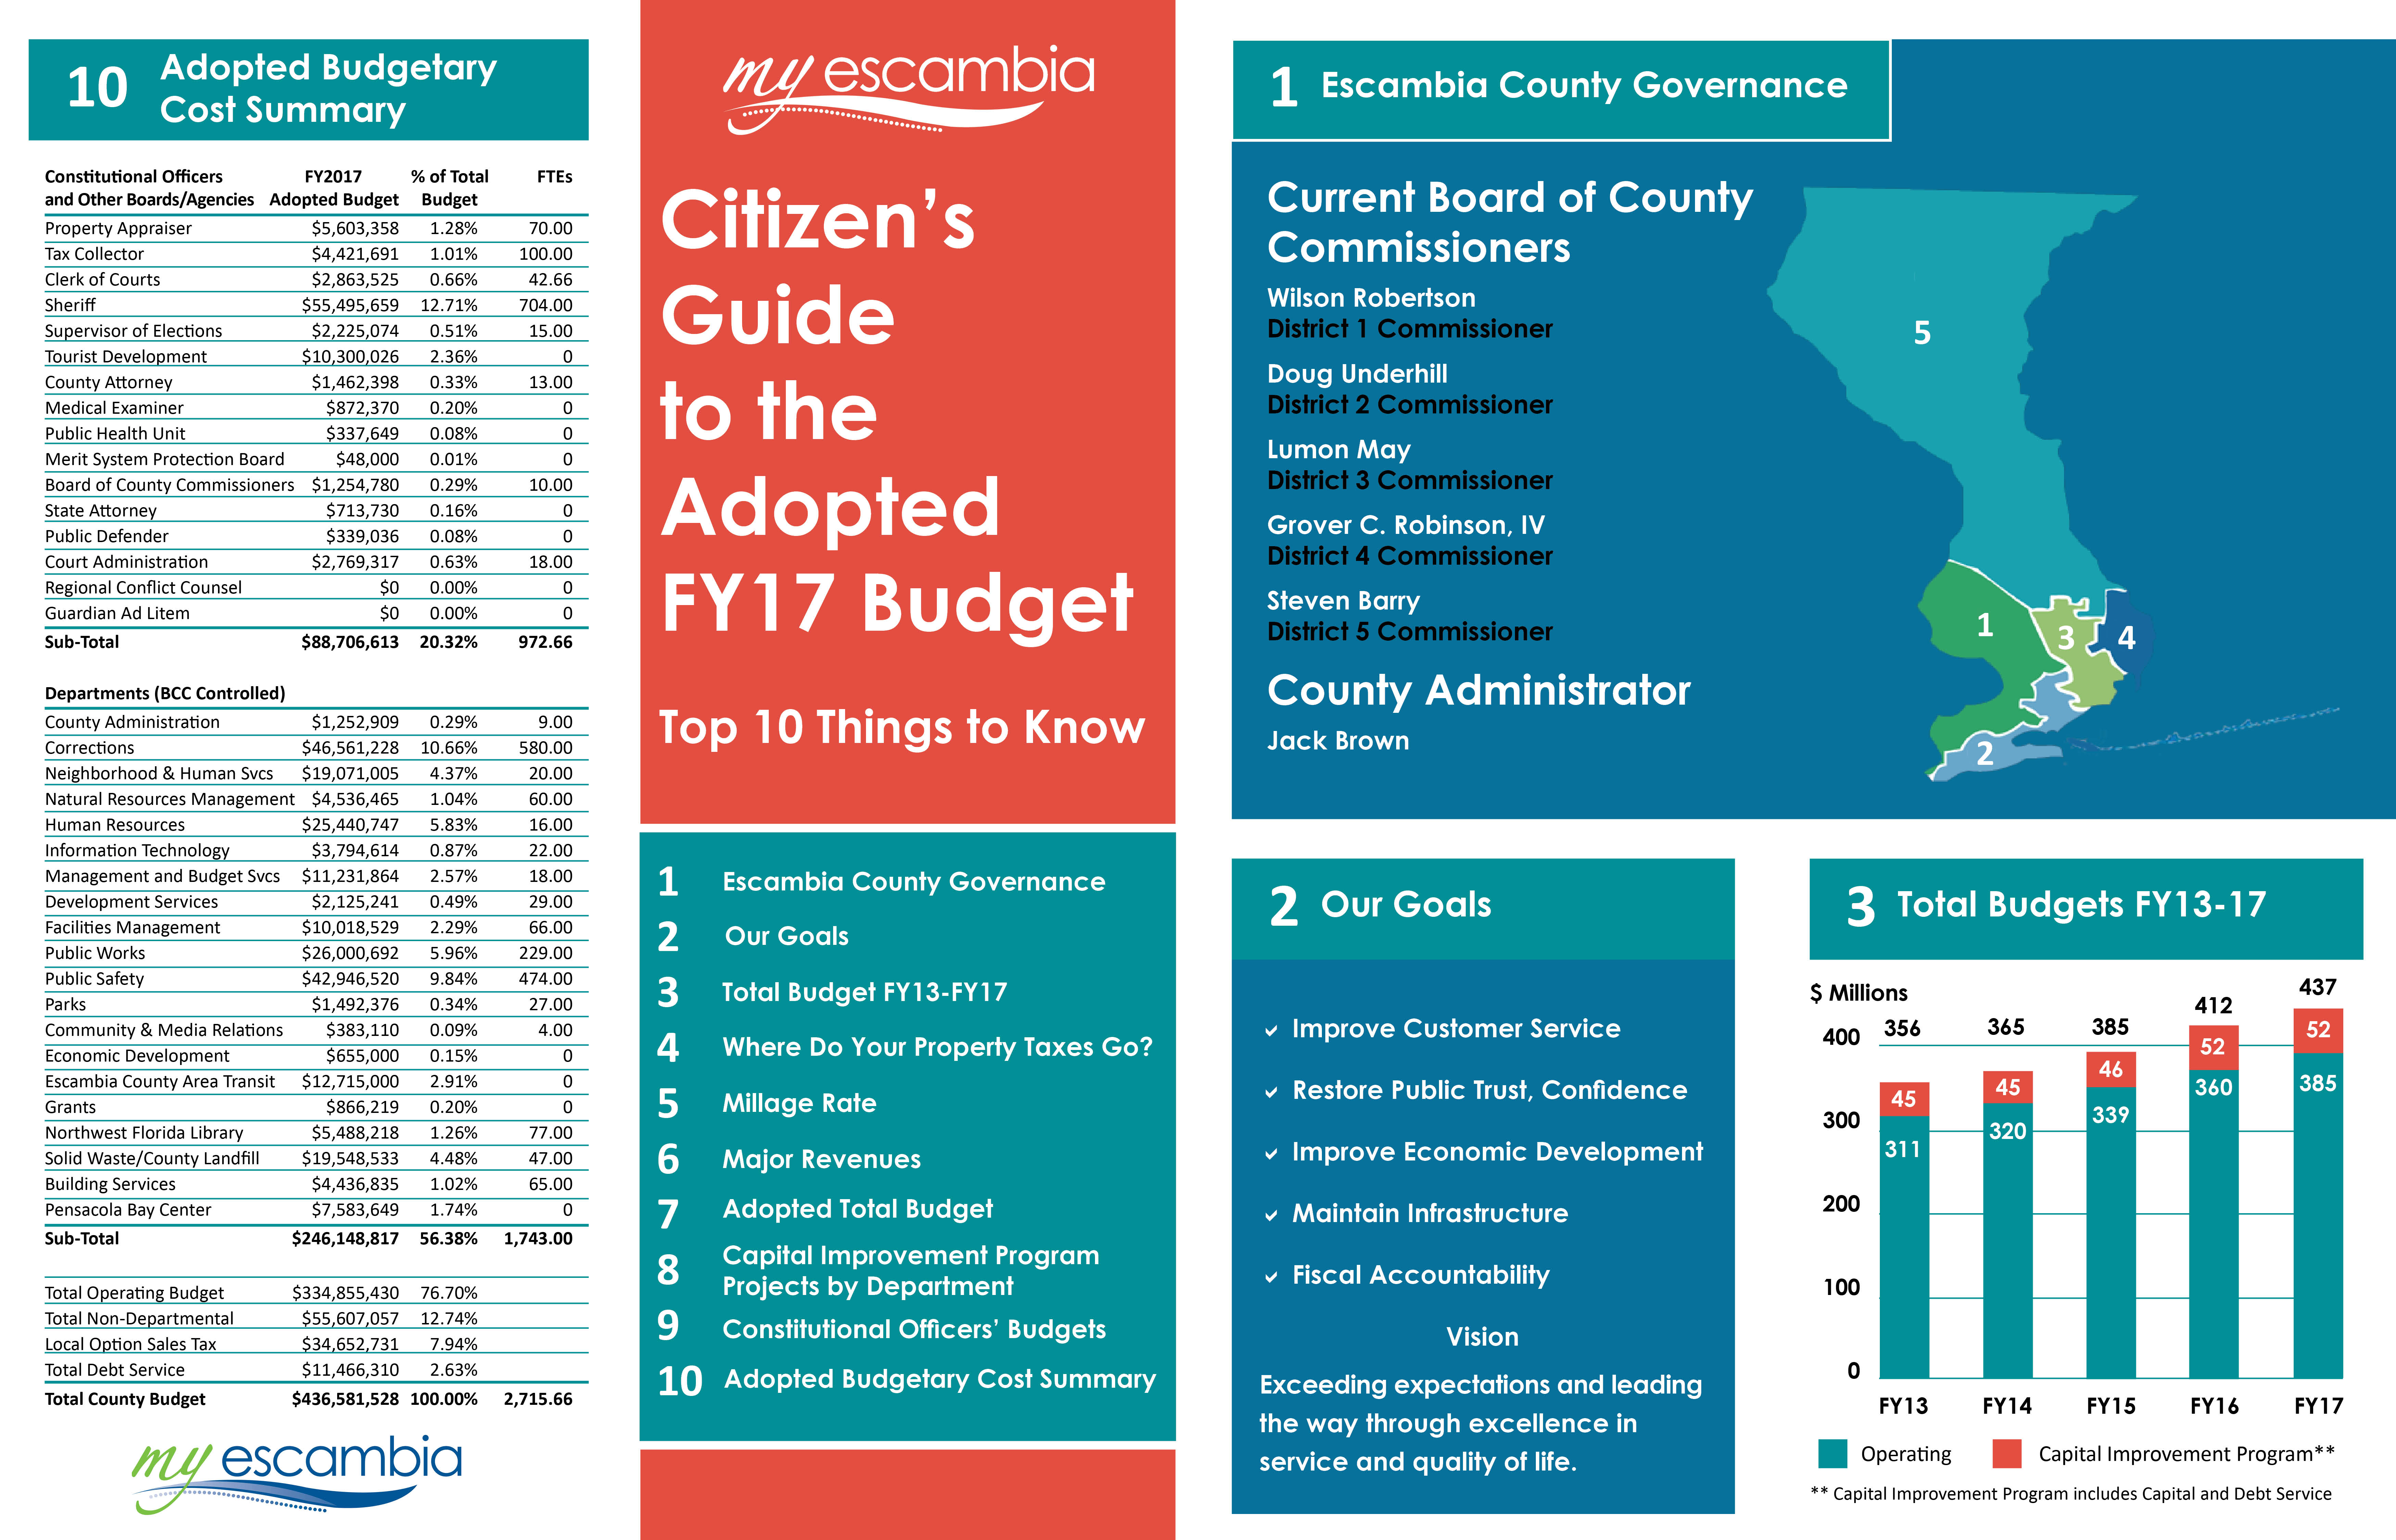 2017 Citizens Guide to the Adopted Budget-Front